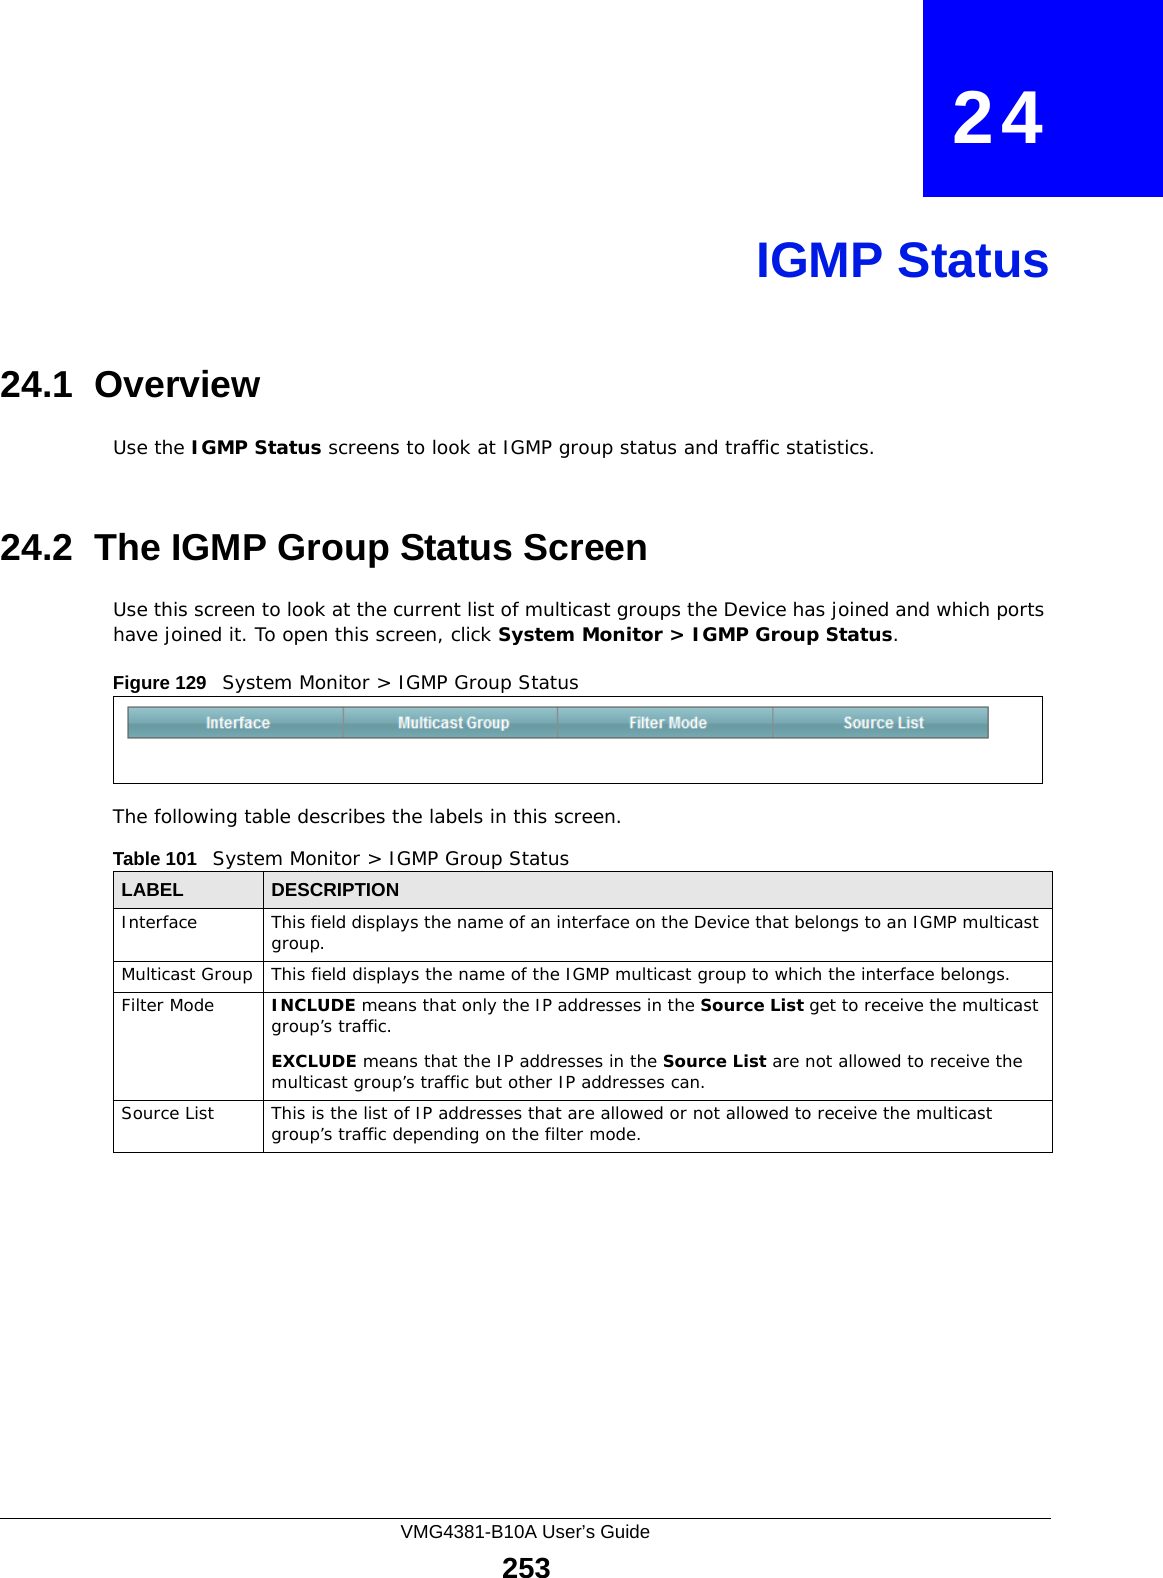 VMG4381-B10A User’s Guide253CHAPTER   24IGMP Status24.1  OverviewUse the IGMP Status screens to look at IGMP group status and traffic statistics. 24.2  The IGMP Group Status ScreenUse this screen to look at the current list of multicast groups the Device has joined and which ports have joined it. To open this screen, click System Monitor &gt; IGMP Group Status.Figure 129   System Monitor &gt; IGMP Group StatusThe following table describes the labels in this screen.Table 101   System Monitor &gt; IGMP Group StatusLABEL DESCRIPTIONInterface This field displays the name of an interface on the Device that belongs to an IGMP multicast group. Multicast Group This field displays the name of the IGMP multicast group to which the interface belongs. Filter Mode  INCLUDE means that only the IP addresses in the Source List get to receive the multicast group’s traffic.EXCLUDE means that the IP addresses in the Source List are not allowed to receive the multicast group’s traffic but other IP addresses can.Source List This is the list of IP addresses that are allowed or not allowed to receive the multicast group’s traffic depending on the filter mode.